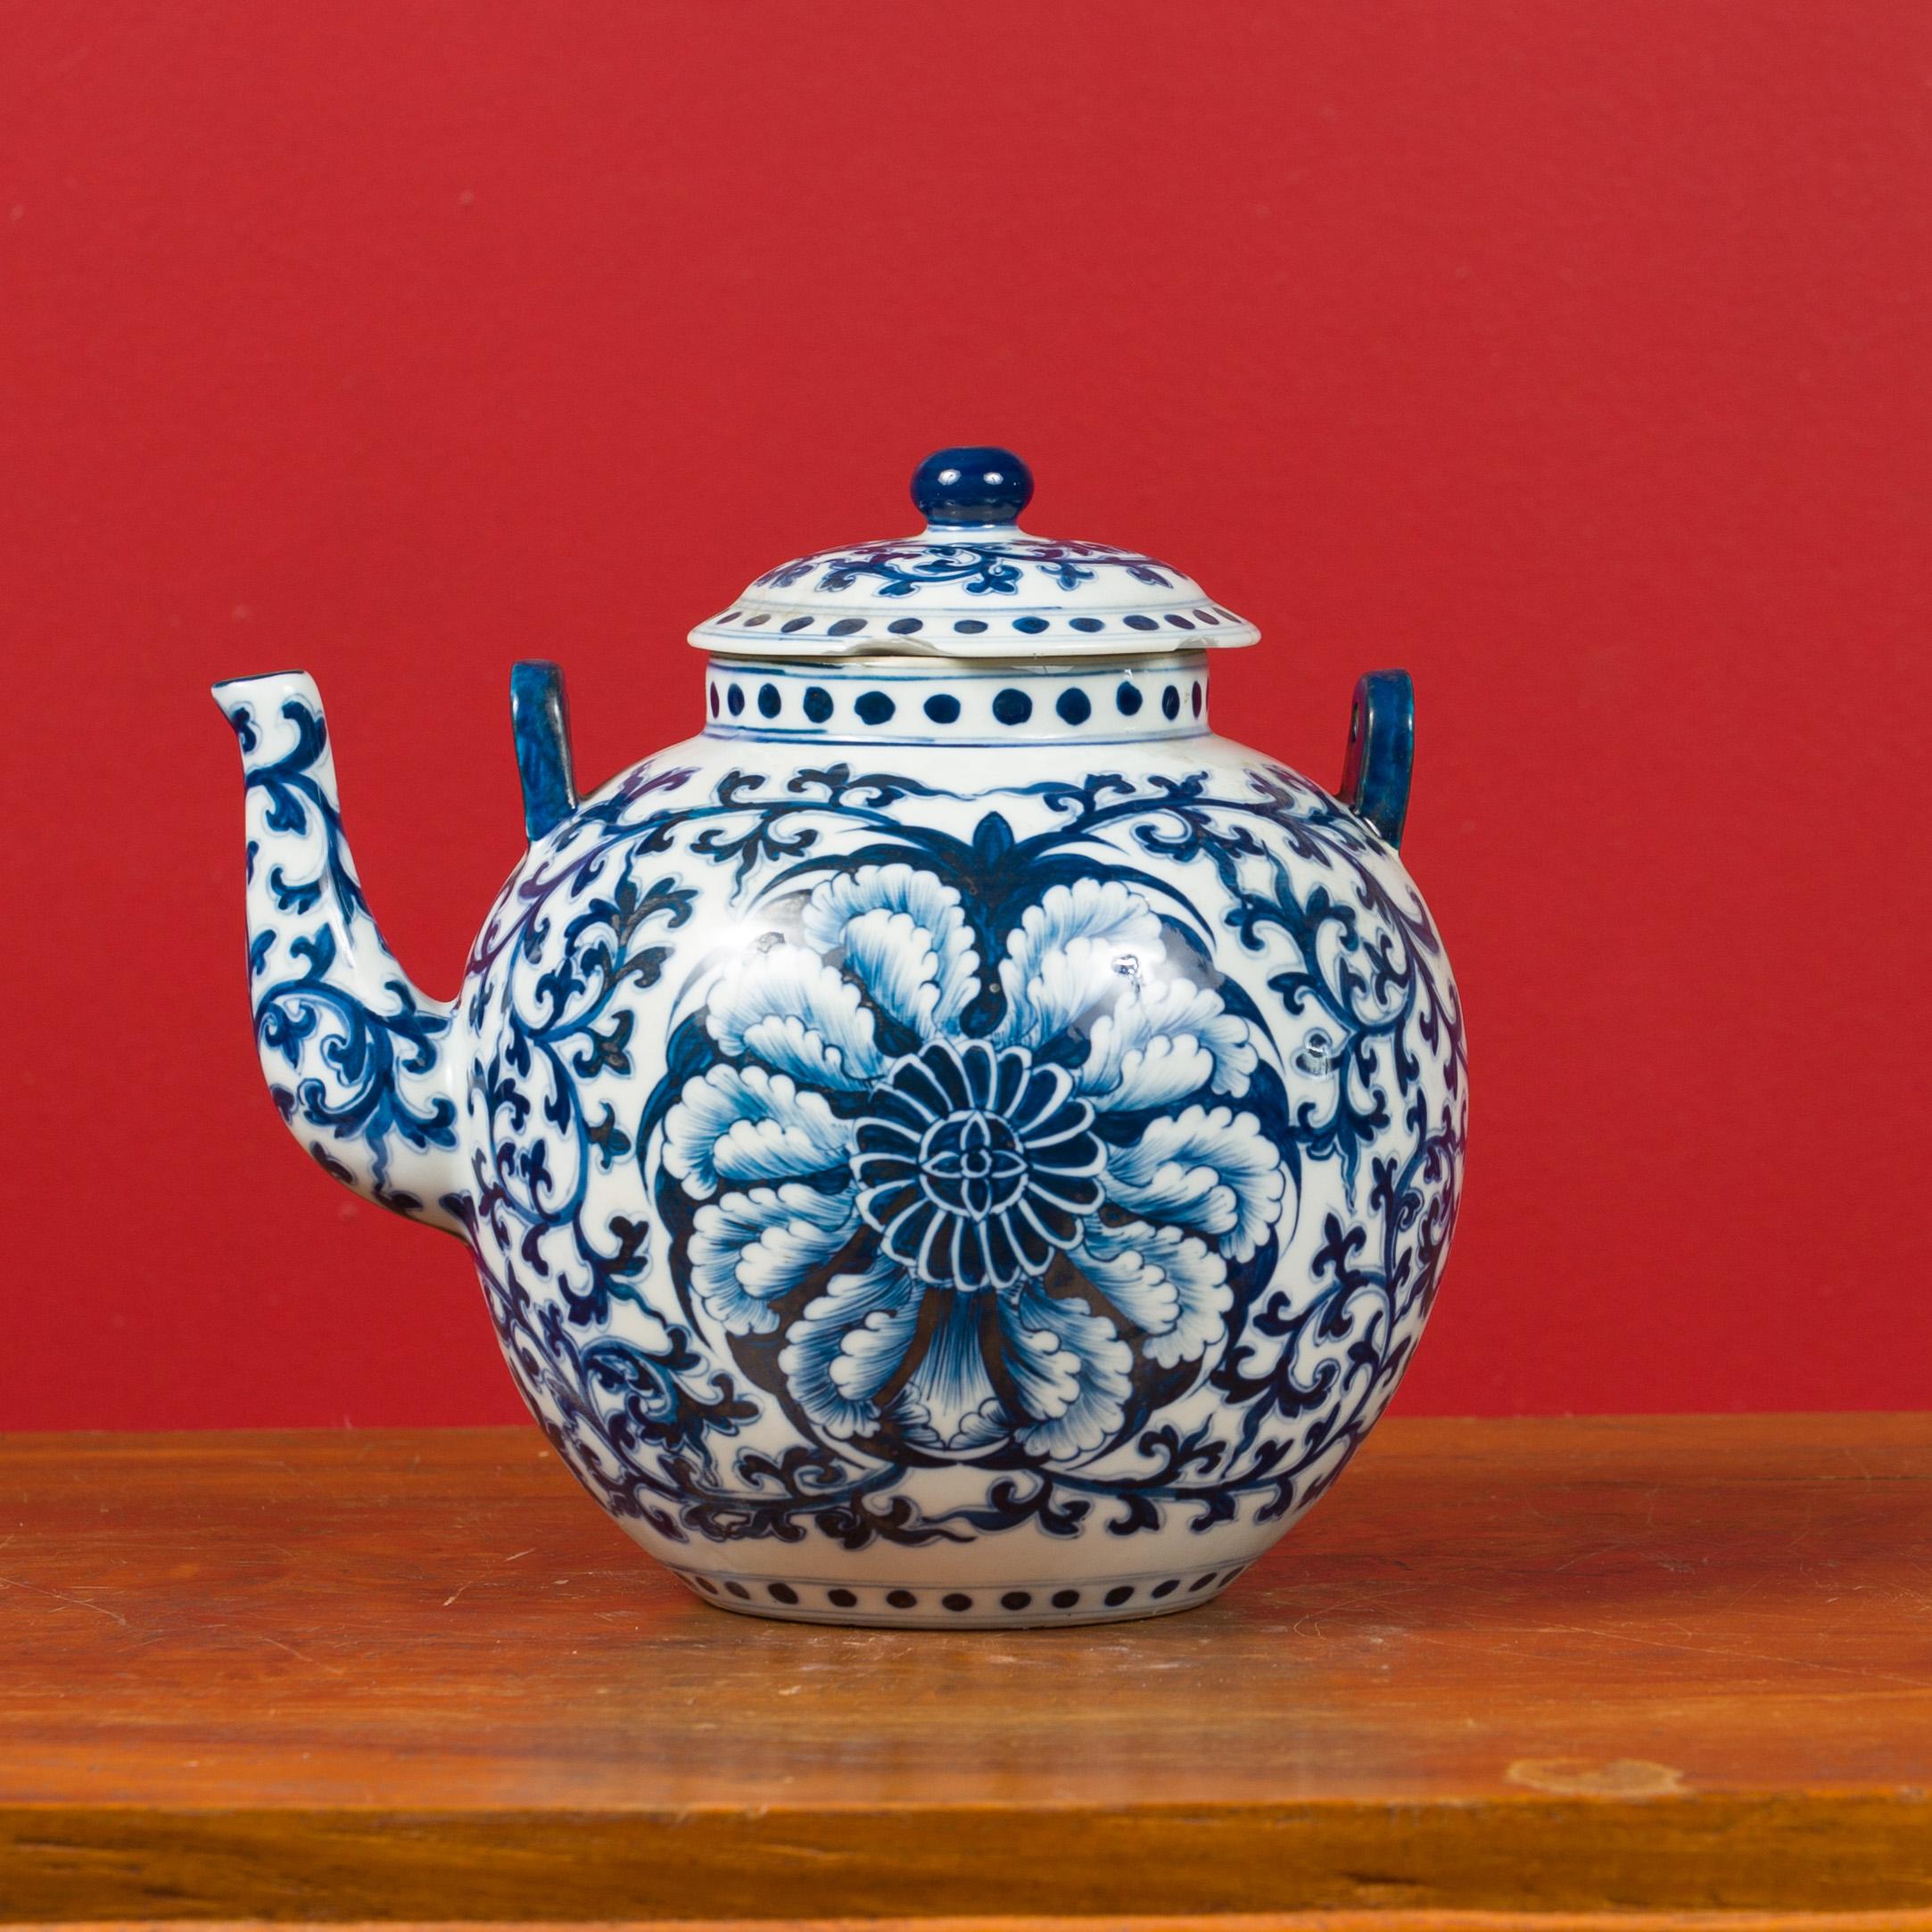 A Chinese vintage blue and white porcelain teapot from the mid 20th century. Created in China during the midcentury period, this lovely teapot features a circular lid with petite sphere at the top, sitting above a round body adorned with an abundant